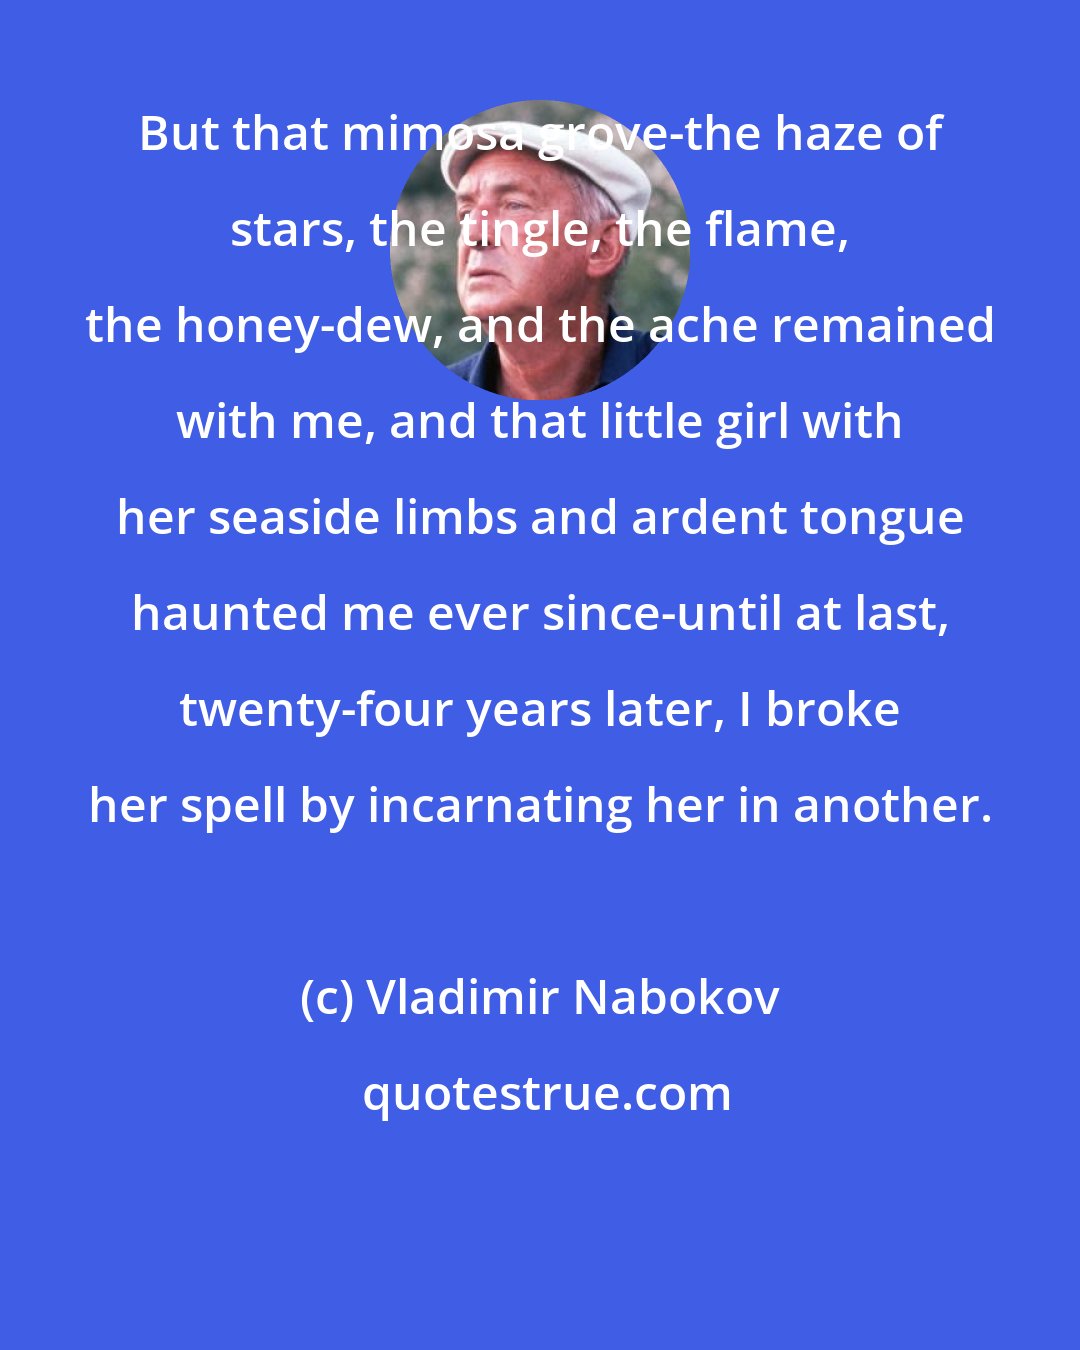 Vladimir Nabokov: But that mimosa grove-the haze of stars, the tingle, the flame, the honey-dew, and the ache remained with me, and that little girl with her seaside limbs and ardent tongue haunted me ever since-until at last, twenty-four years later, I broke her spell by incarnating her in another.